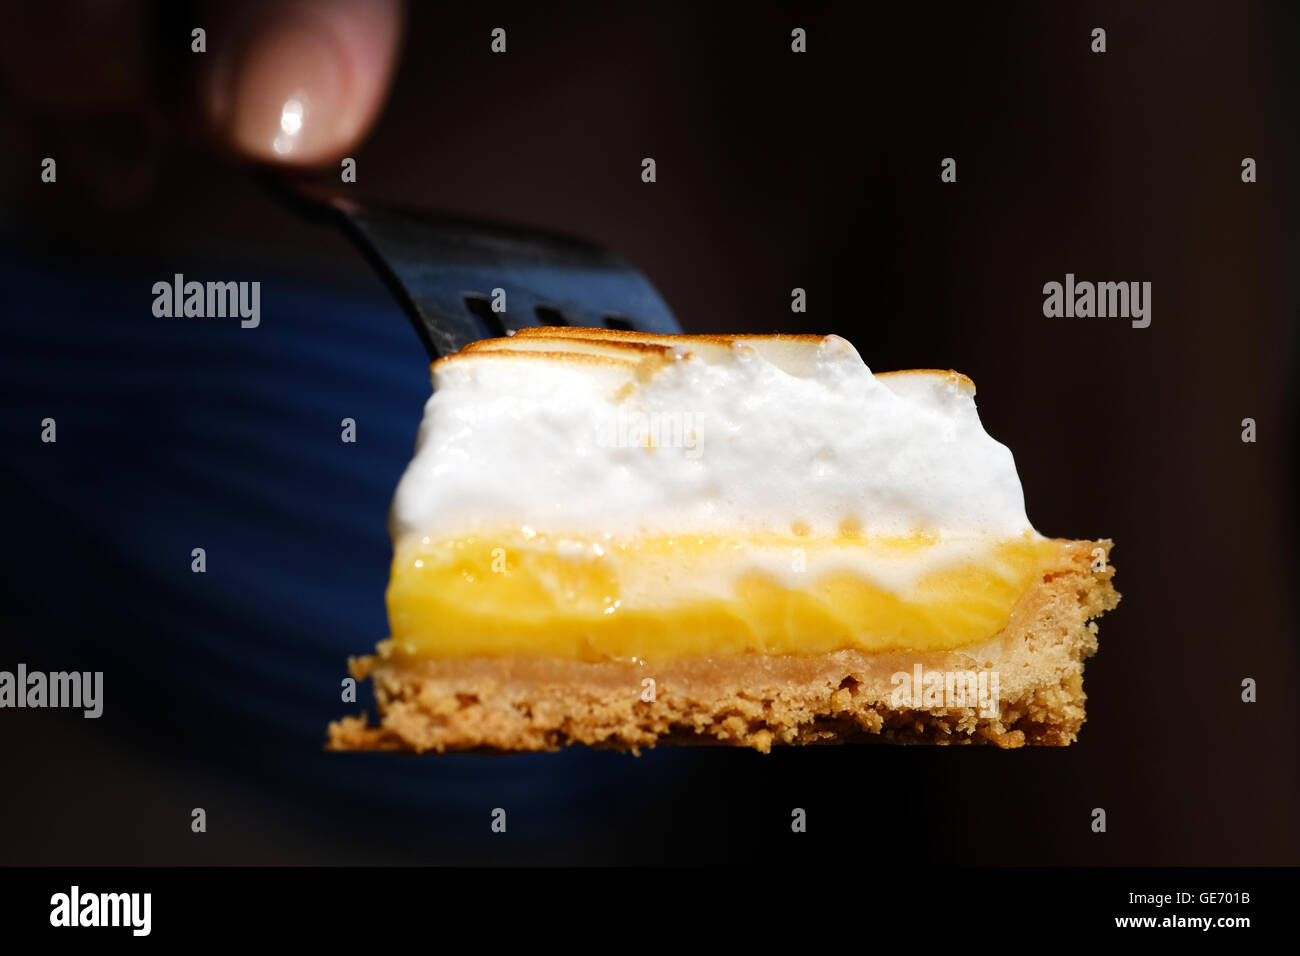 A delicious looking slice of Lemon Meringue cake on a fork Stock Photo